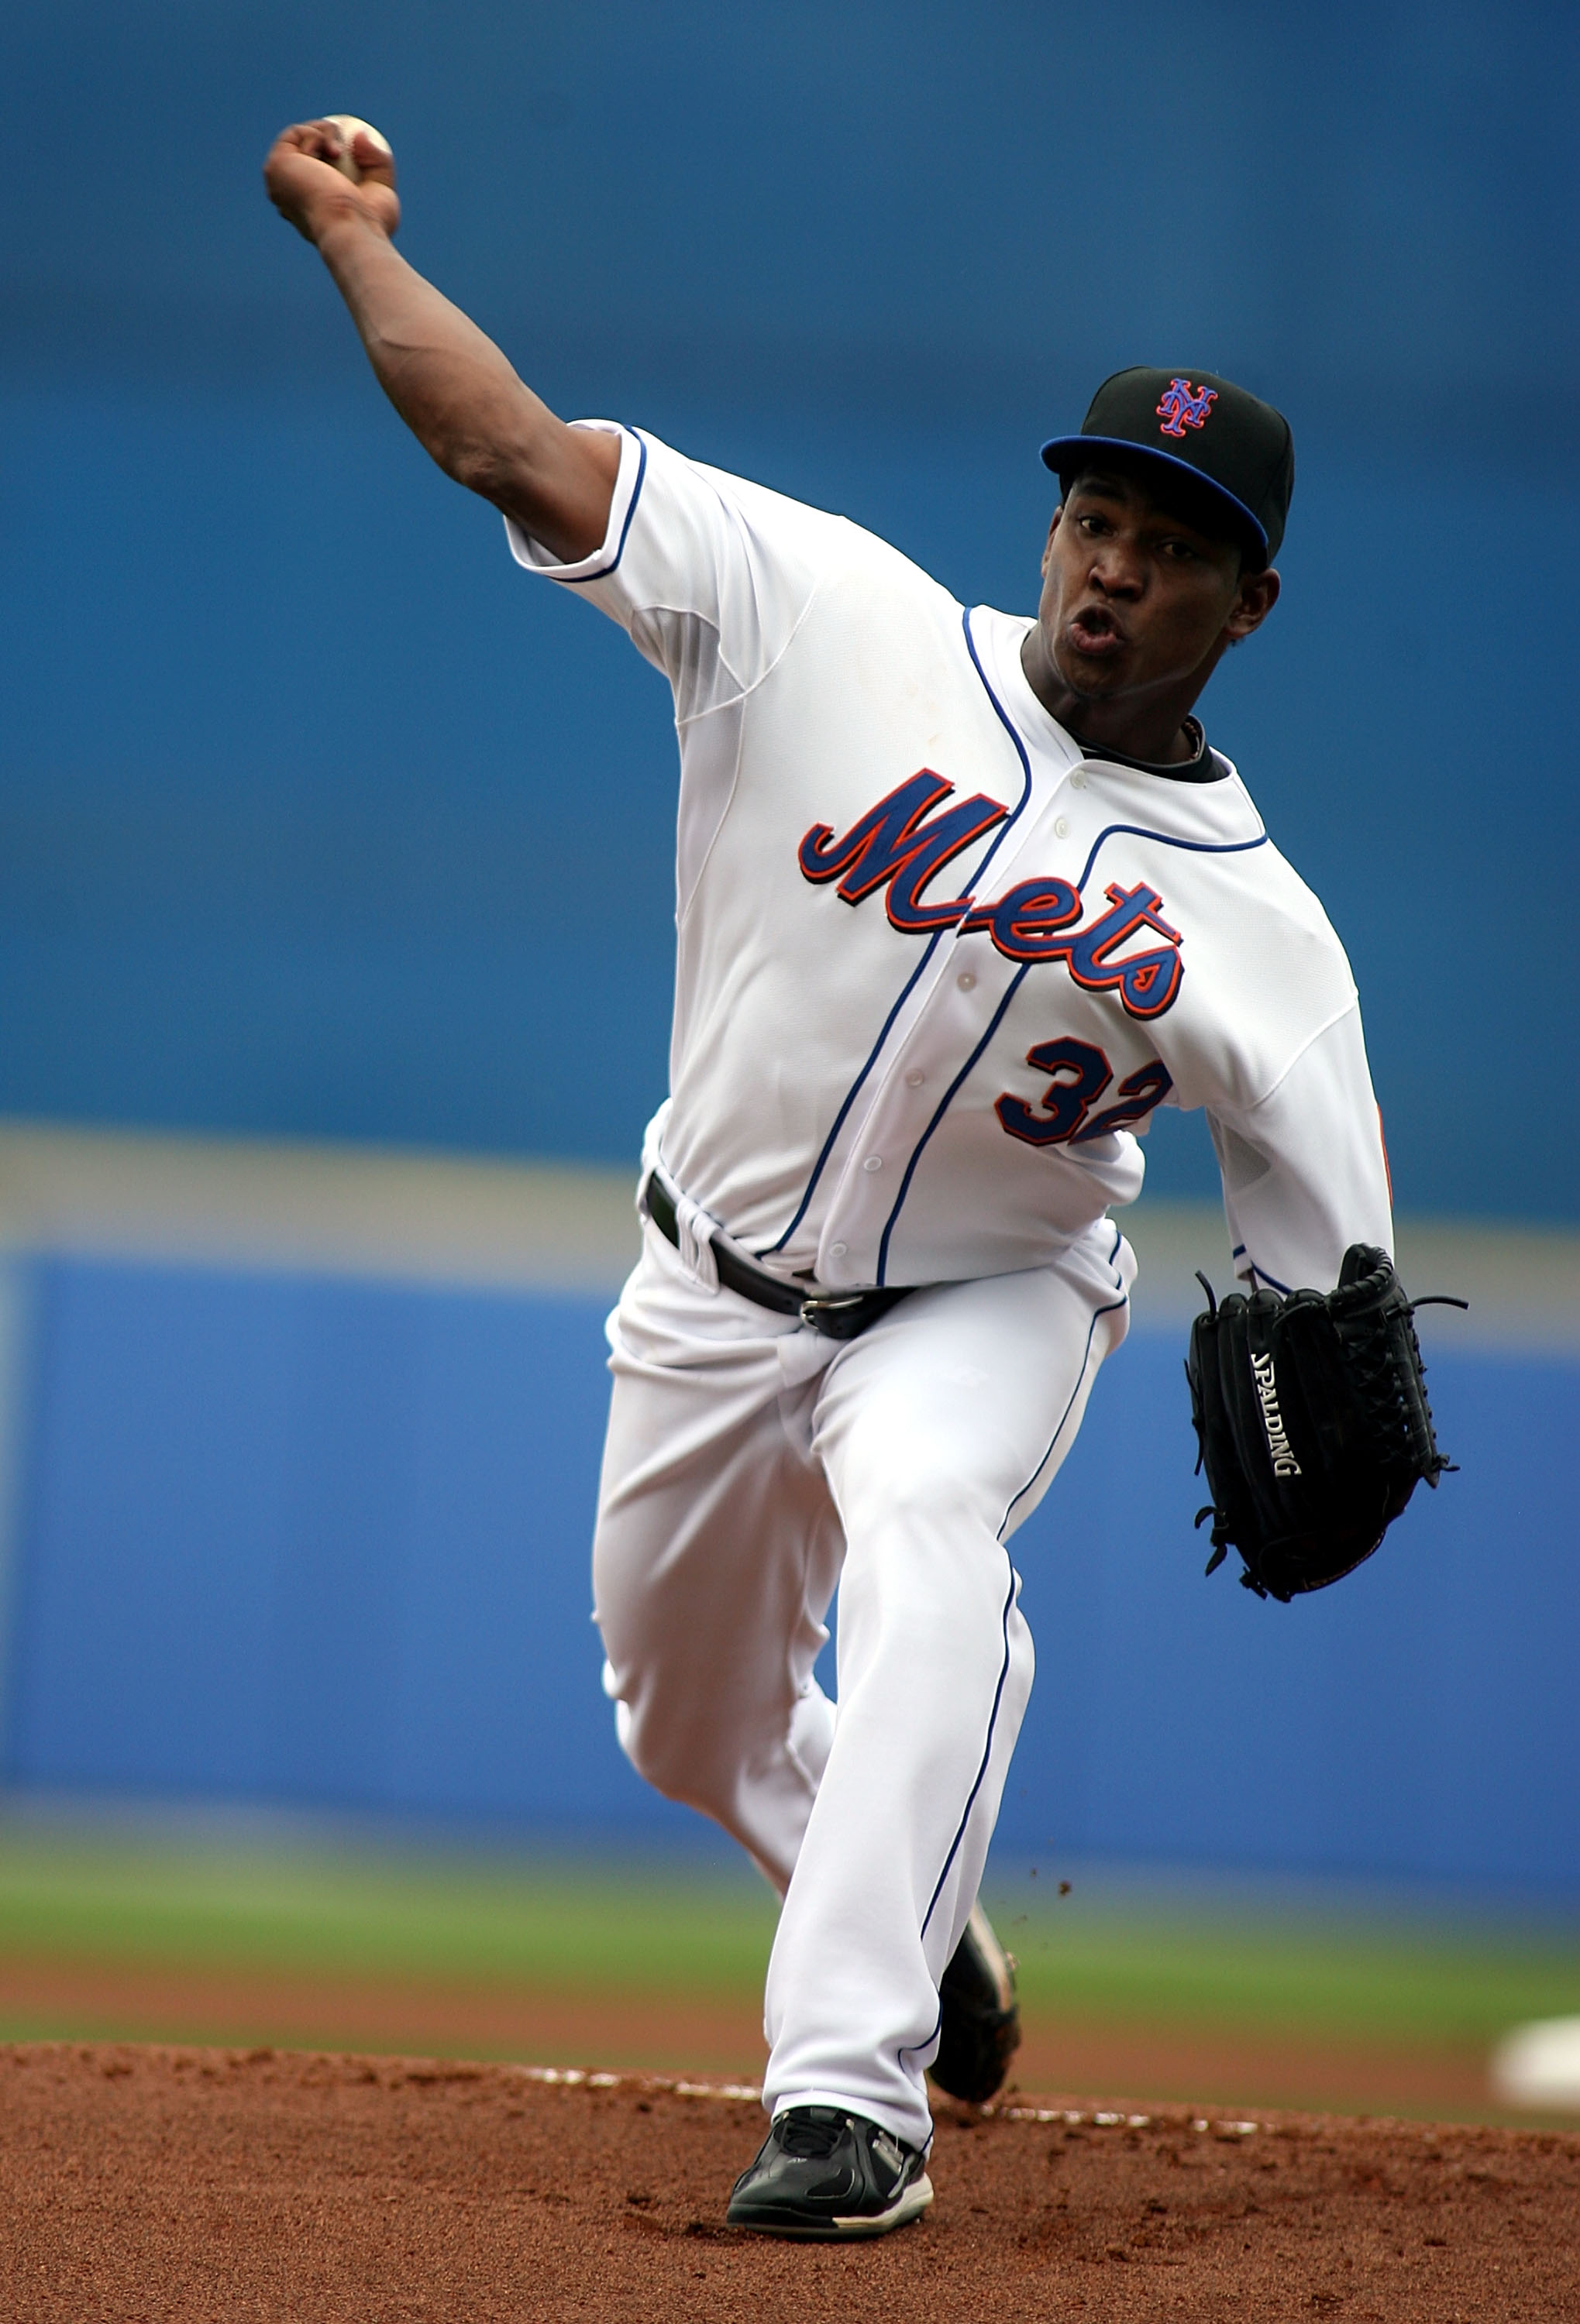 PORT ST. LUCIE, FL - FEBRUARY 26:  Jenrry Mejia #32 of the New York Mets throws against the Atlanta Braves at Digital Domain Park on February 26, 2011 in Port St. Lucie, Florida.  (Photo by Marc Serota/Getty Images)